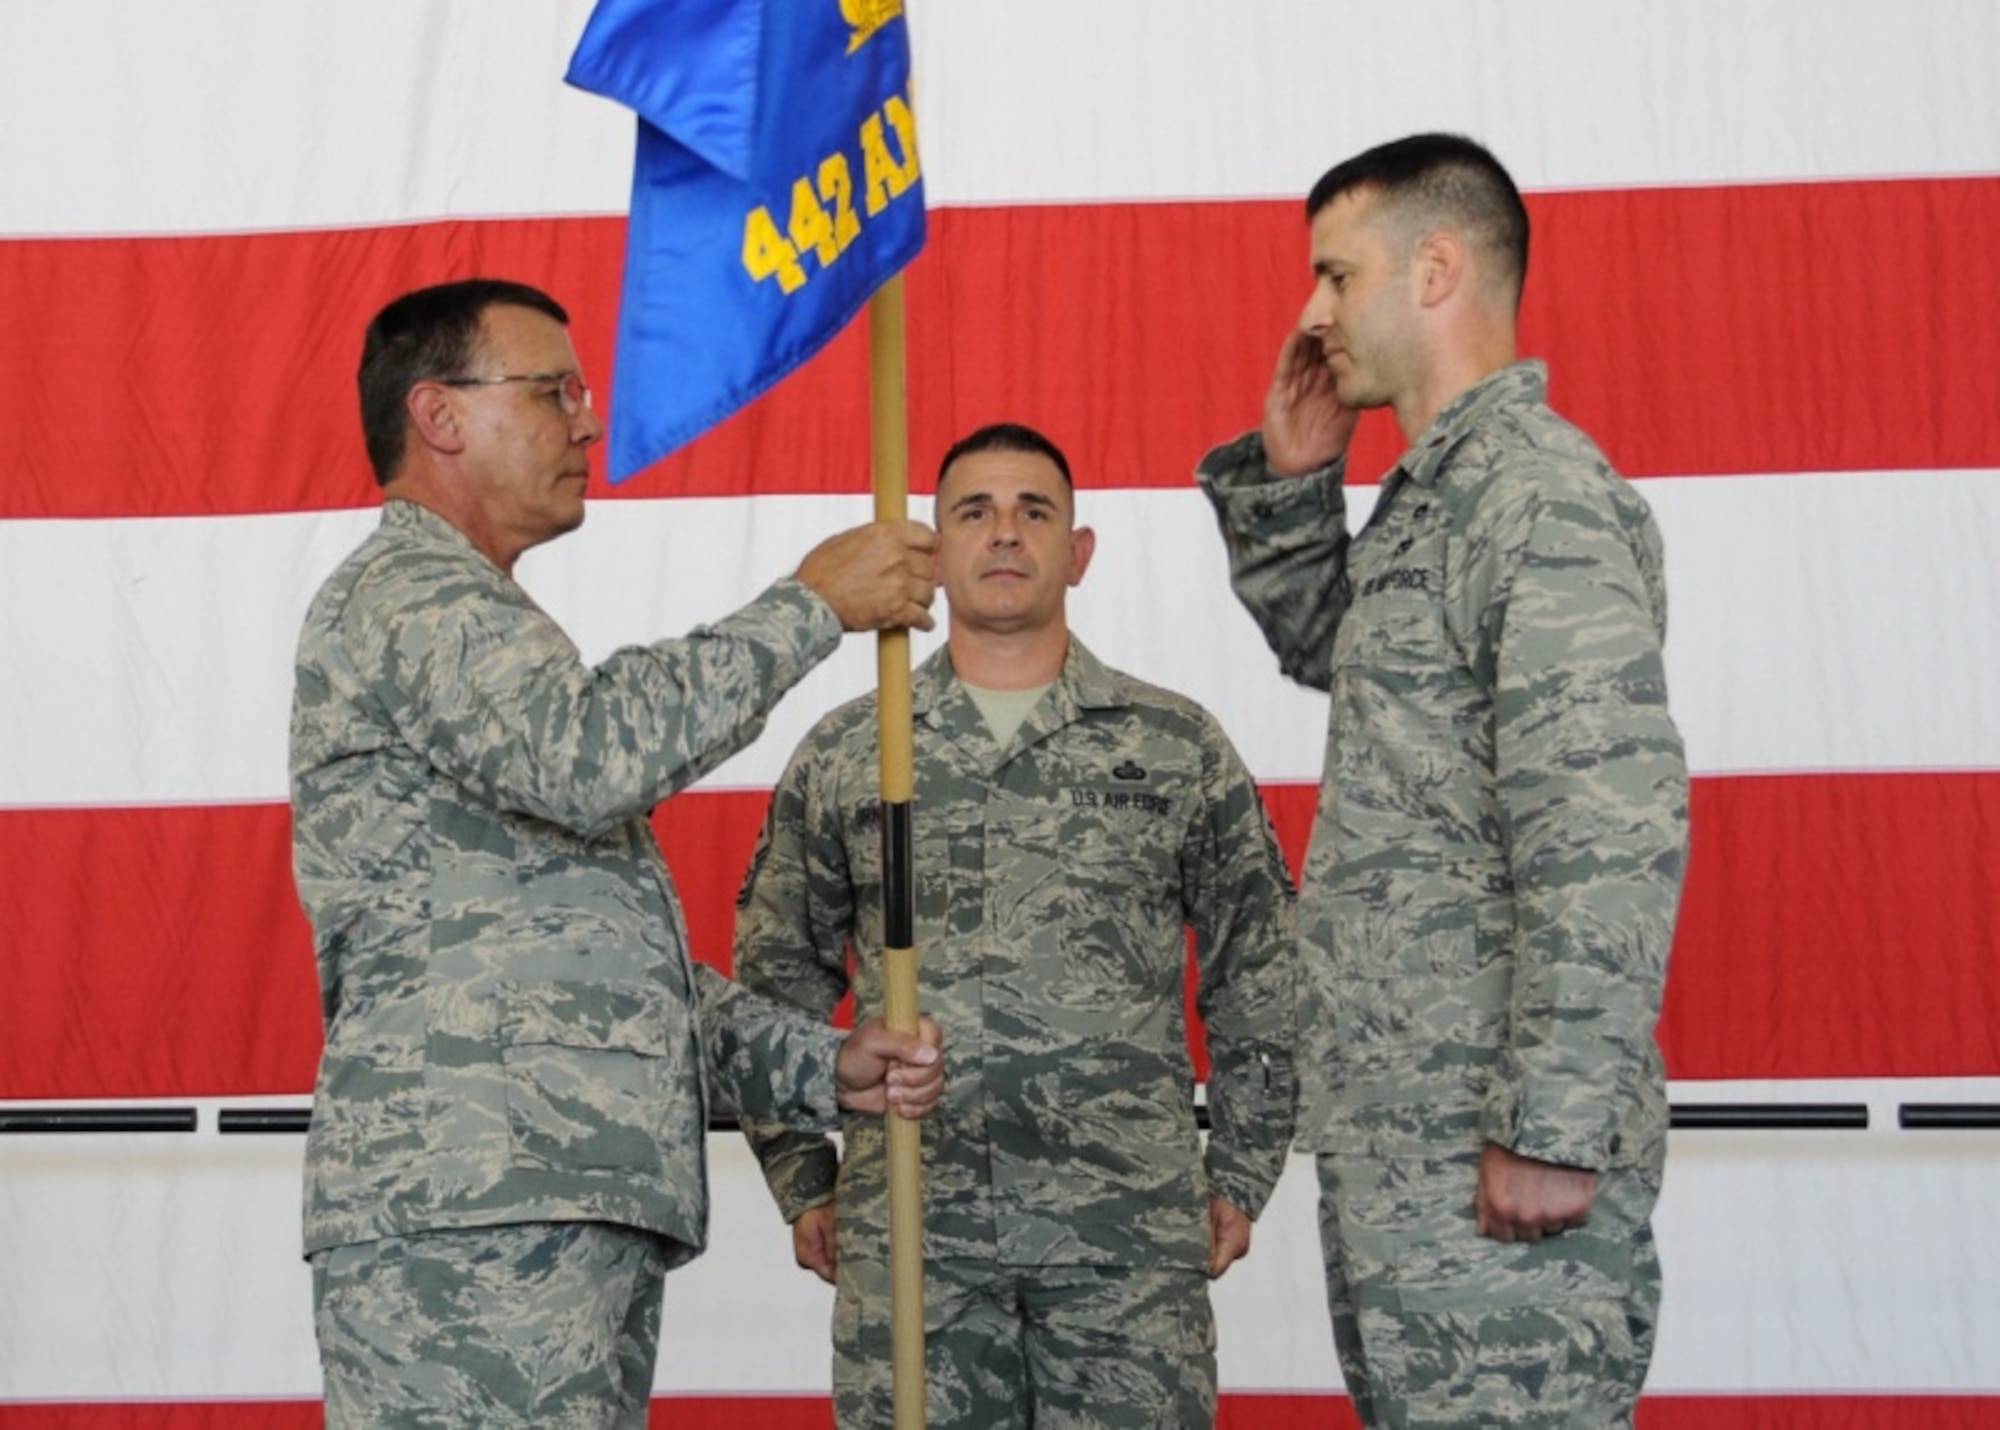 Col. James Brock, 442d Fighter Wing Maintenance Group commander, passes the guidon to Maj. James Chevalier, incoming 442d Aircraft Maintenance Squadron commander, during an assumption of command ceremony at Whiteman Air Force Base, Mo., July 8, 2017. Chevalier's previous assignment was the Implementation Branch Chief, Repair Network Integration Division, Headquarters Air Force Material Command, Wright-Patterson AFB, Oh. (U.S. Air Force photo by Senior Airman Missy Sterling)